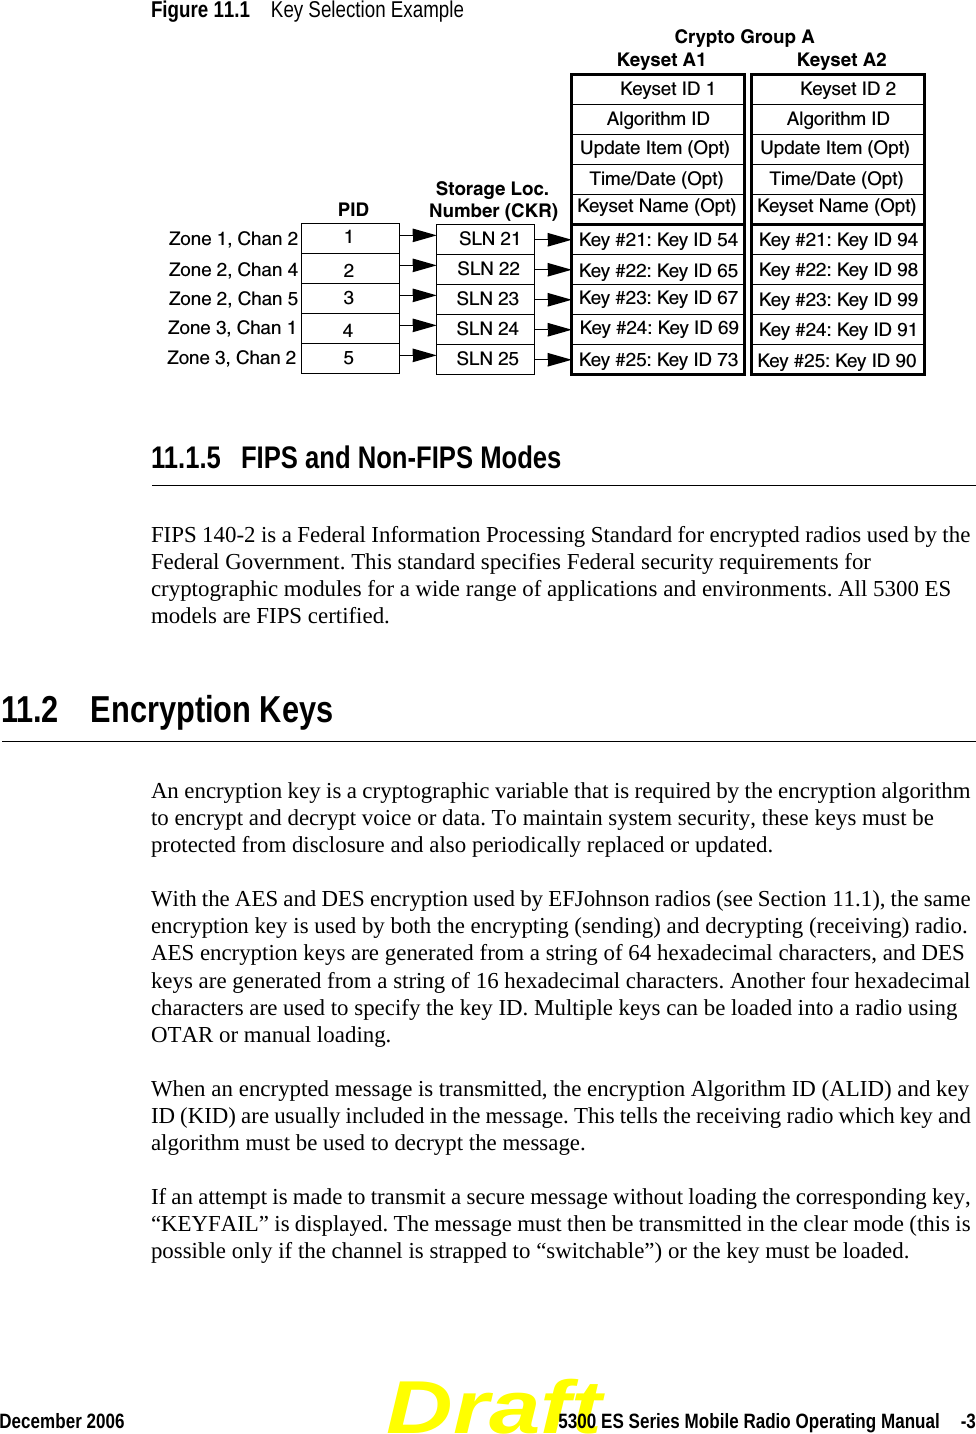 DraftDecember 2006 5300 ES Series Mobile Radio Operating Manual  -3Figure 11.1 Key Selection Example 11.1.5 FIPS and Non-FIPS ModesFIPS 140-2 is a Federal Information Processing Standard for encrypted radios used by the Federal Government. This standard specifies Federal security requirements for cryptographic modules for a wide range of applications and environments. All 5300 ES models are FIPS certified.11.2 Encryption KeysAn encryption key is a cryptographic variable that is required by the encryption algorithm to encrypt and decrypt voice or data. To maintain system security, these keys must be protected from disclosure and also periodically replaced or updated.With the AES and DES encryption used by EFJohnson radios (see Section 11.1), the same encryption key is used by both the encrypting (sending) and decrypting (receiving) radio. AES encryption keys are generated from a string of 64 hexadecimal characters, and DES keys are generated from a string of 16 hexadecimal characters. Another four hexadecimal characters are used to specify the key ID. Multiple keys can be loaded into a radio using OTAR or manual loading.When an encrypted message is transmitted, the encryption Algorithm ID (ALID) and key ID (KID) are usually included in the message. This tells the receiving radio which key and algorithm must be used to decrypt the message.If an attempt is made to transmit a secure message without loading the corresponding key, “KEYFAIL” is displayed. The message must then be transmitted in the clear mode (this is possible only if the channel is strapped to “switchable”) or the key must be loaded.Keyset ID 2Algorithm IDUpdate Item (Opt)Time/Date (Opt)Keyset Name (Opt)SLN 23SLN 25Keyset ID 1Algorithm IDUpdate Item (Opt)Time/Date (Opt)Keyset Name (Opt)Key #21: Key ID 54Storage Loc.SLN 24SLN 22SLN 21Number (CKR)35421PIDKey #22: Key ID 65Key #23: Key ID 67Key #24: Key ID 69Key #25: Key ID 73 Key #25: Key ID 90Key #24: Key ID 91Key #23: Key ID 99Key #22: Key ID 98Key #21: Key ID 94Crypto Group AKeyset A1 Keyset A2Zone 1, Chan 2Zone 2, Chan 4Zone 2, Chan 5Zone 3, Chan 1Zone 3, Chan 2